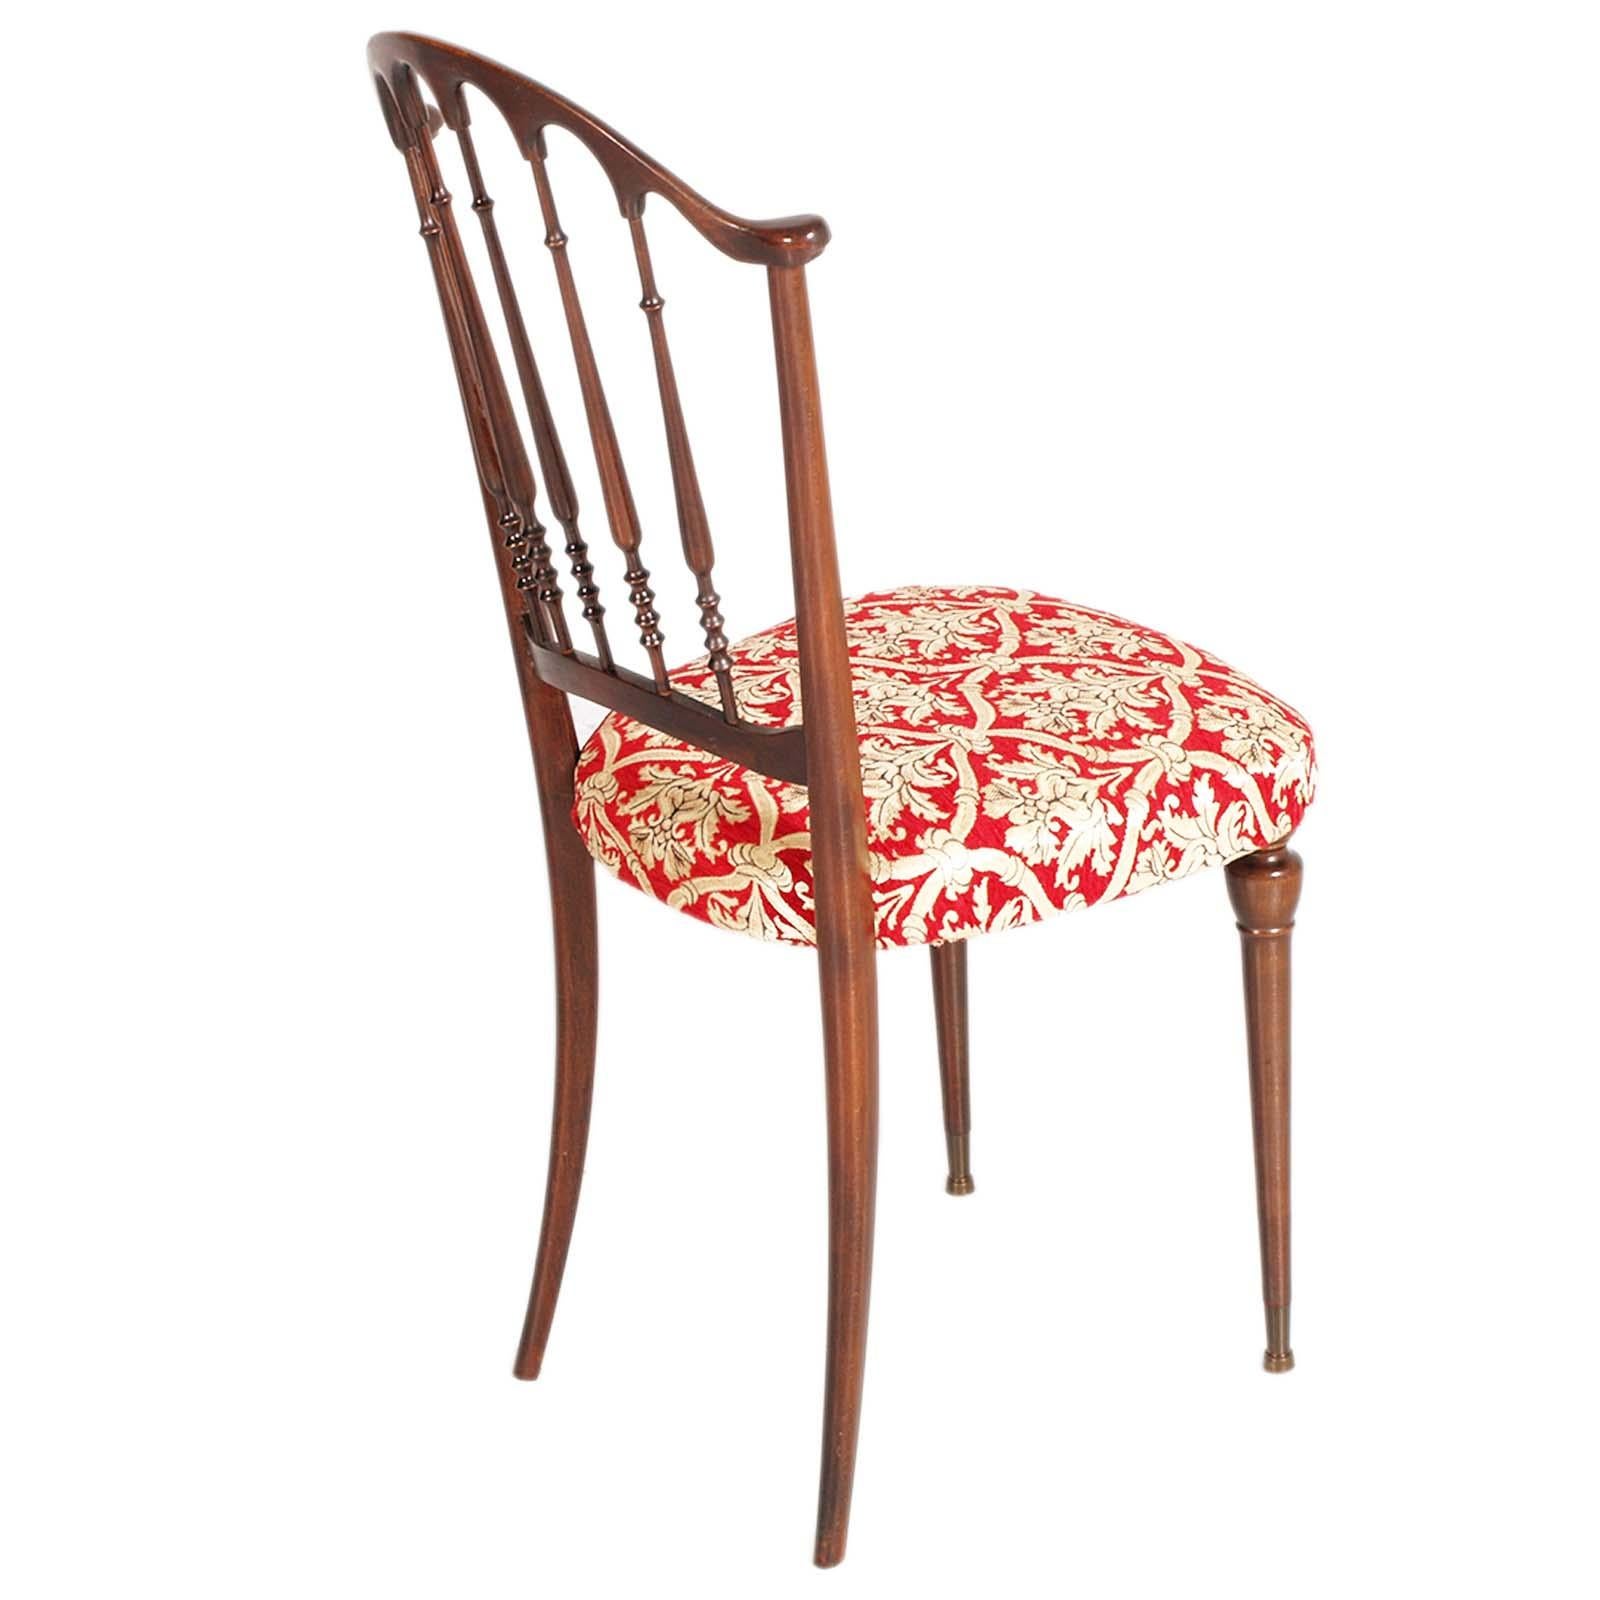 Gothic Revival Mid Century Chiavari Chair by Paolo Buffa, Belle Epoque, Reupholstered Fortuny For Sale